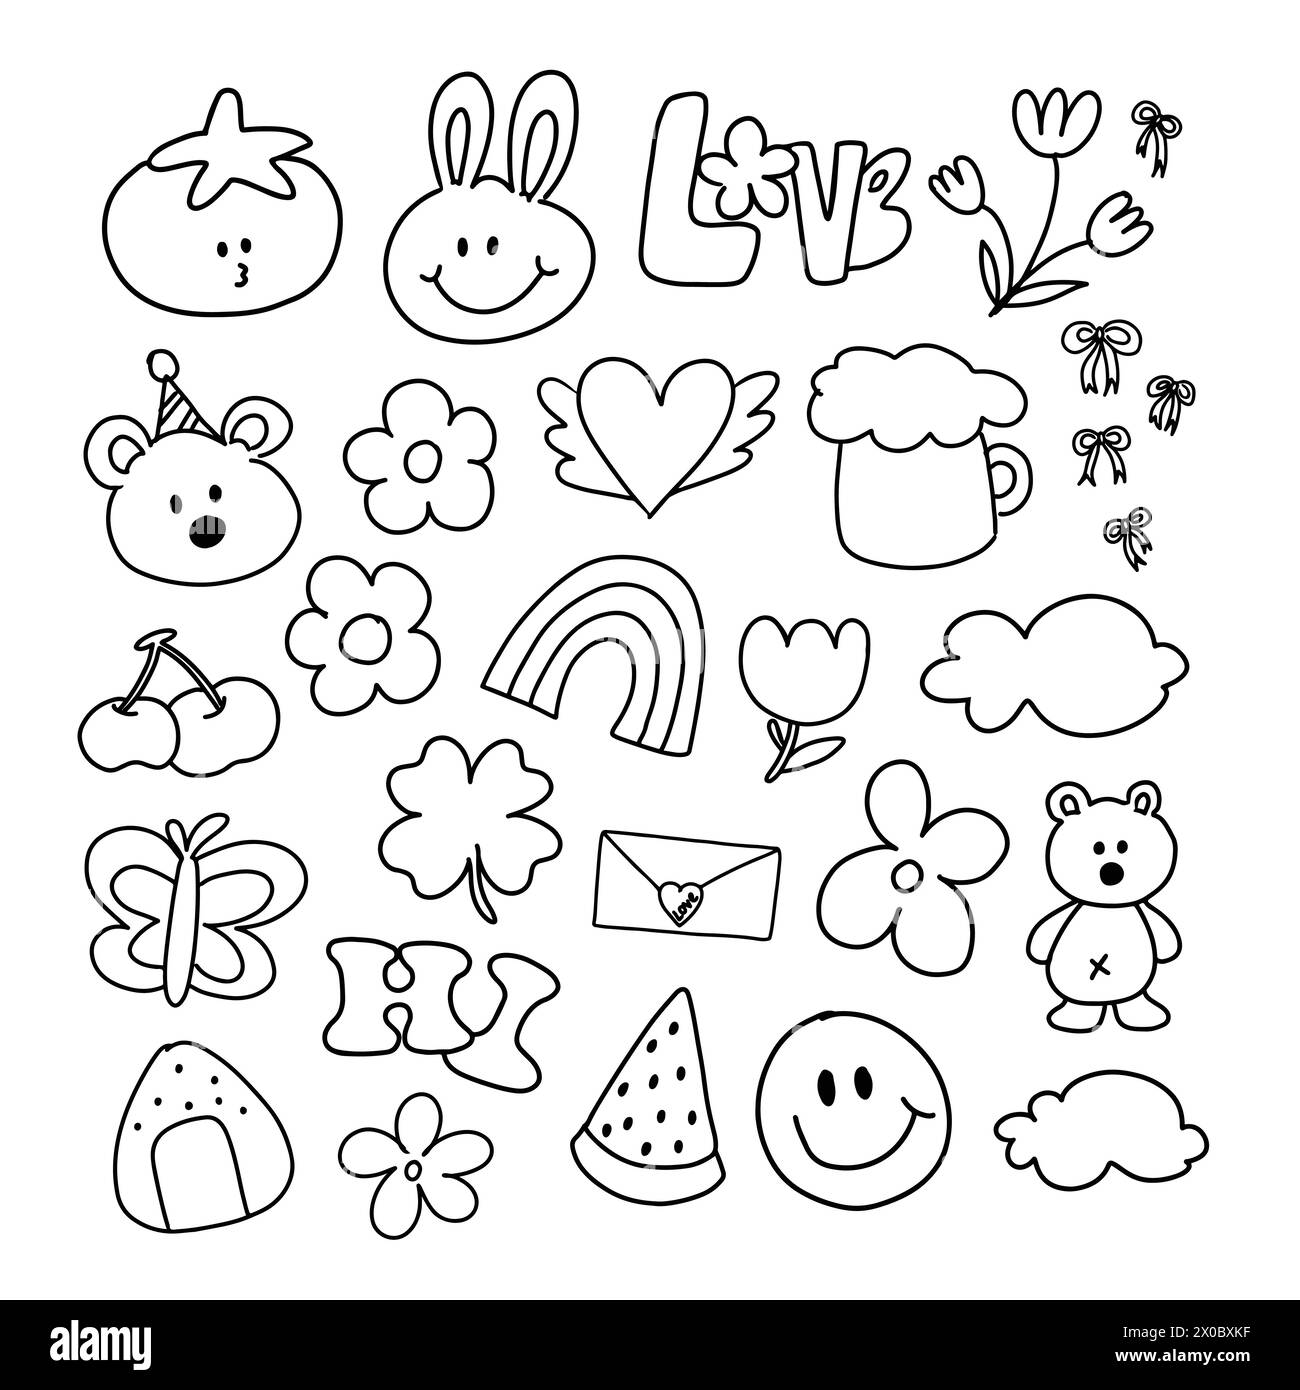 Outlines of hand drawn cute elements such as rainbow, watermelon, tomato, flowers, cherry, butterfly, clover leaf, cloud, teddy bear, bunny, heart Stock Vector